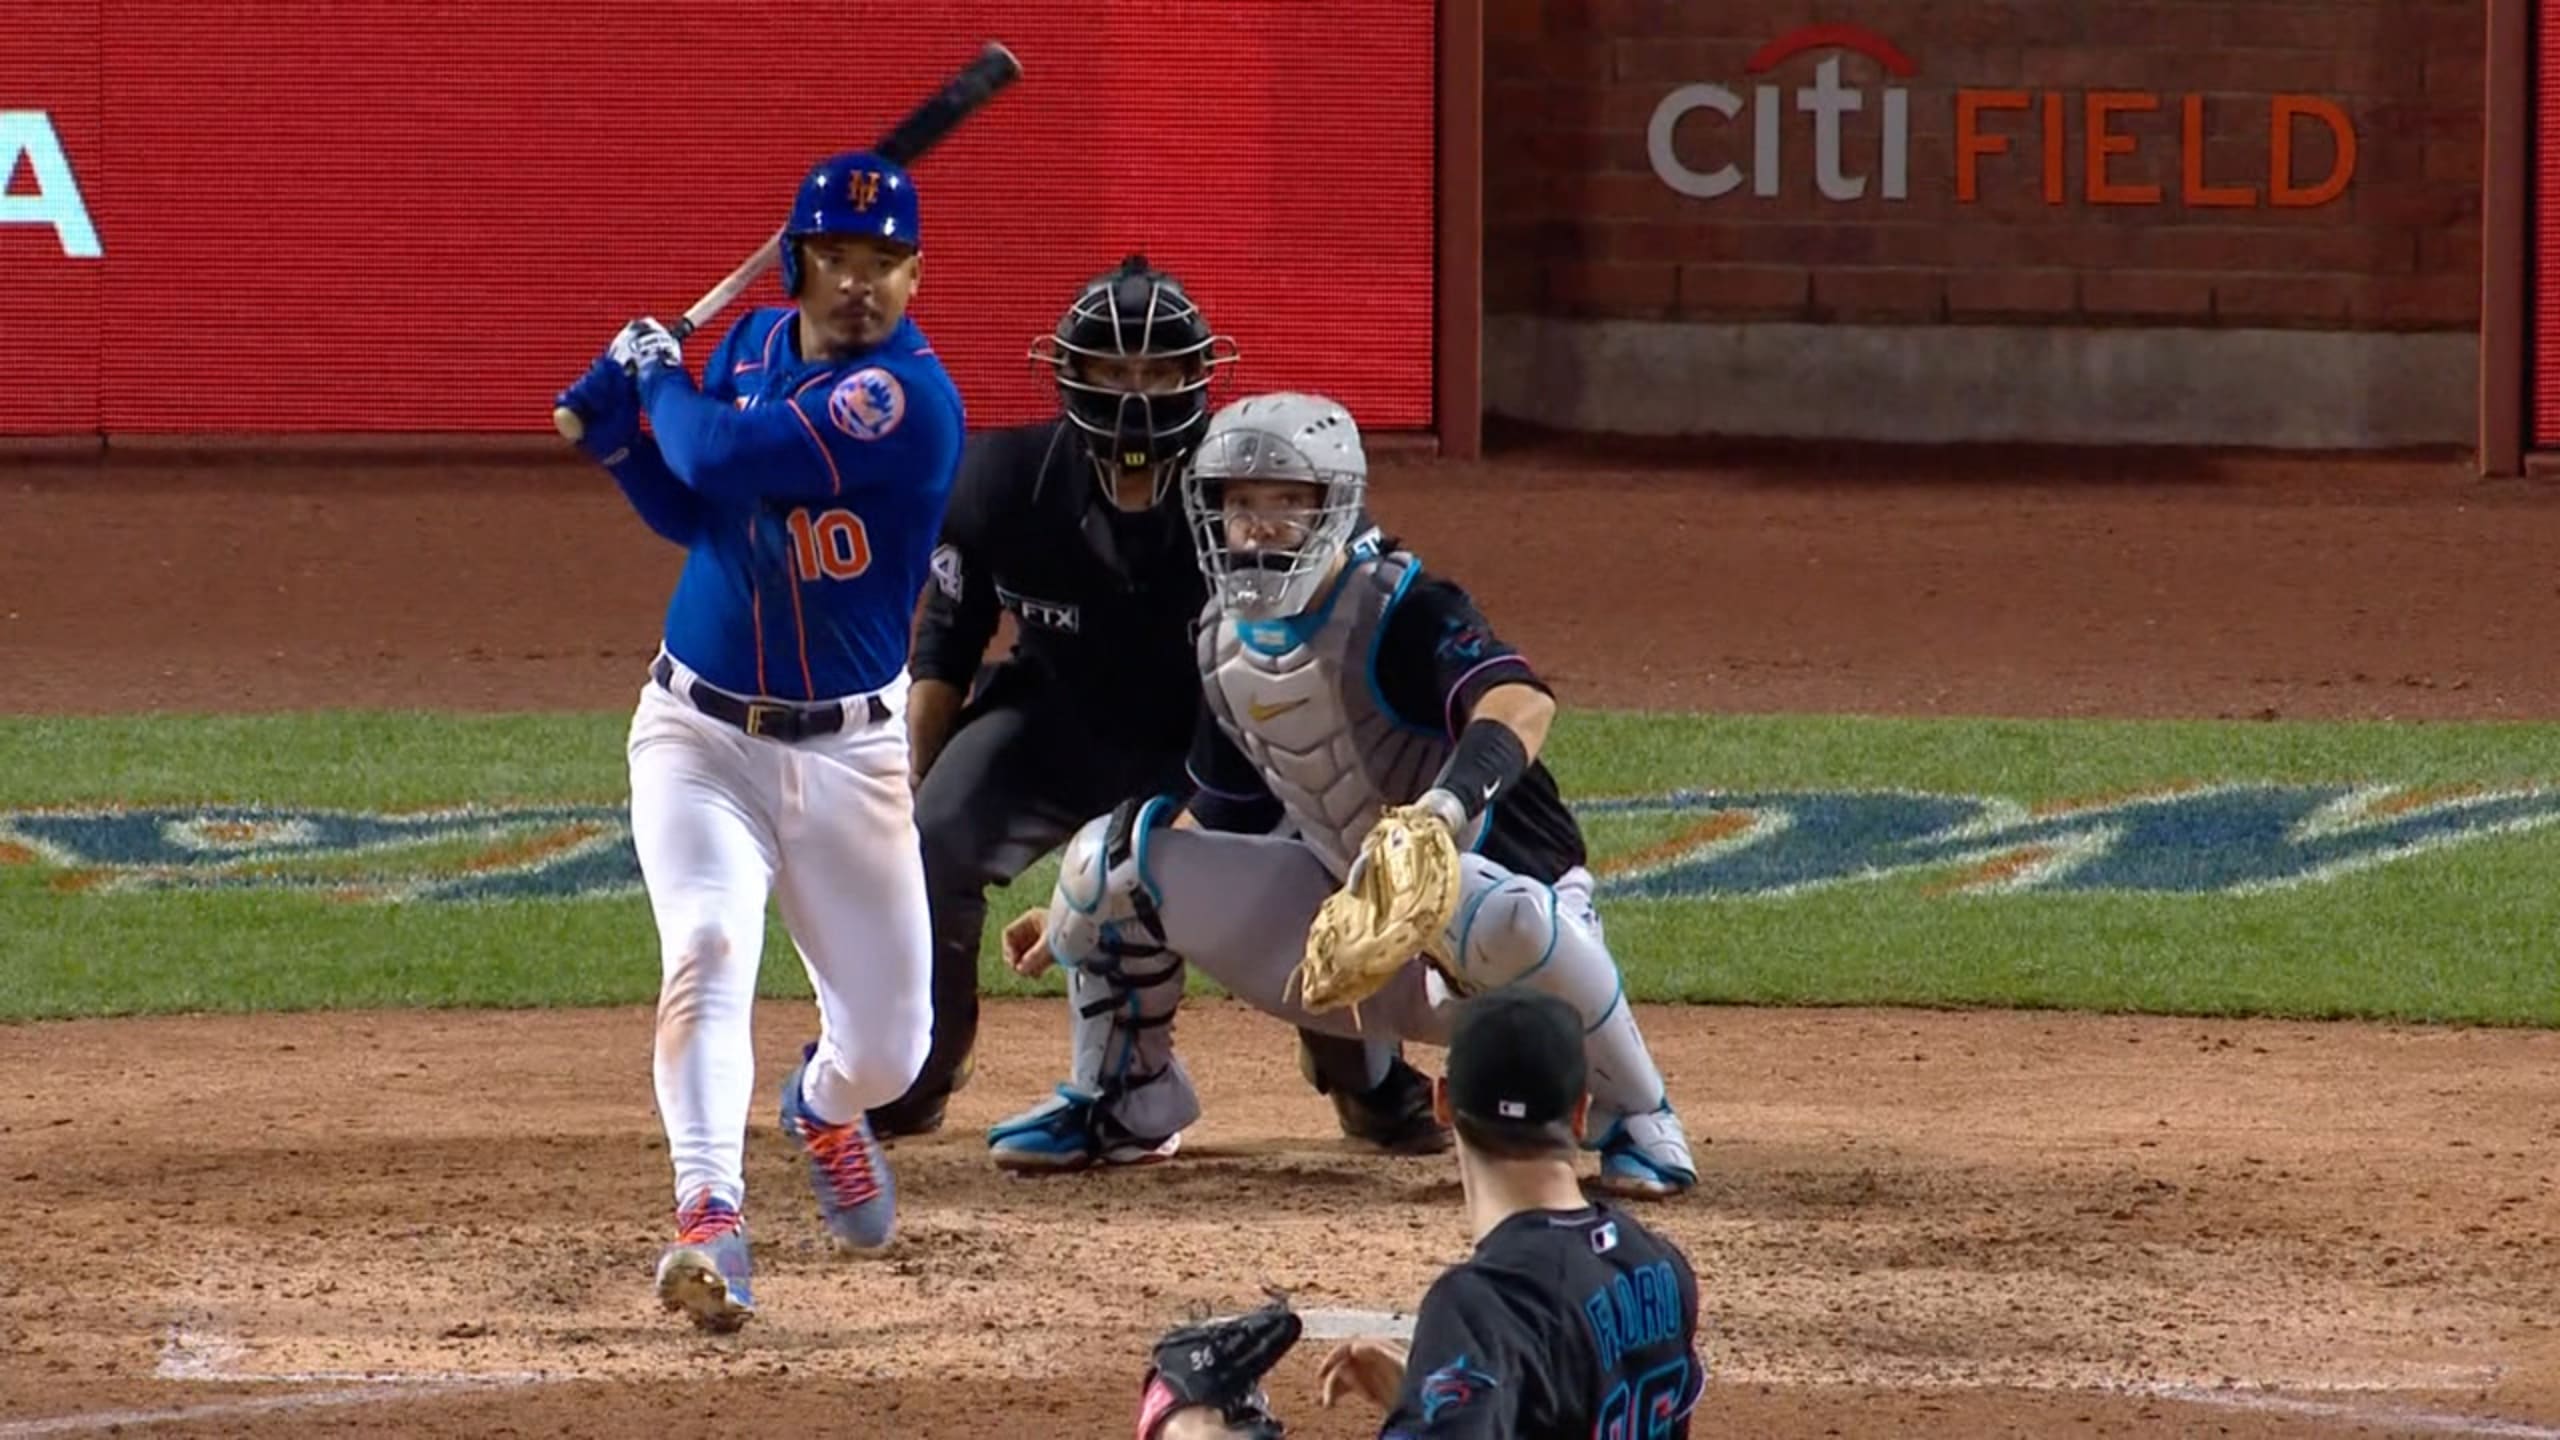 Marlins break through late for doubleheader split with Mets - CBS New York